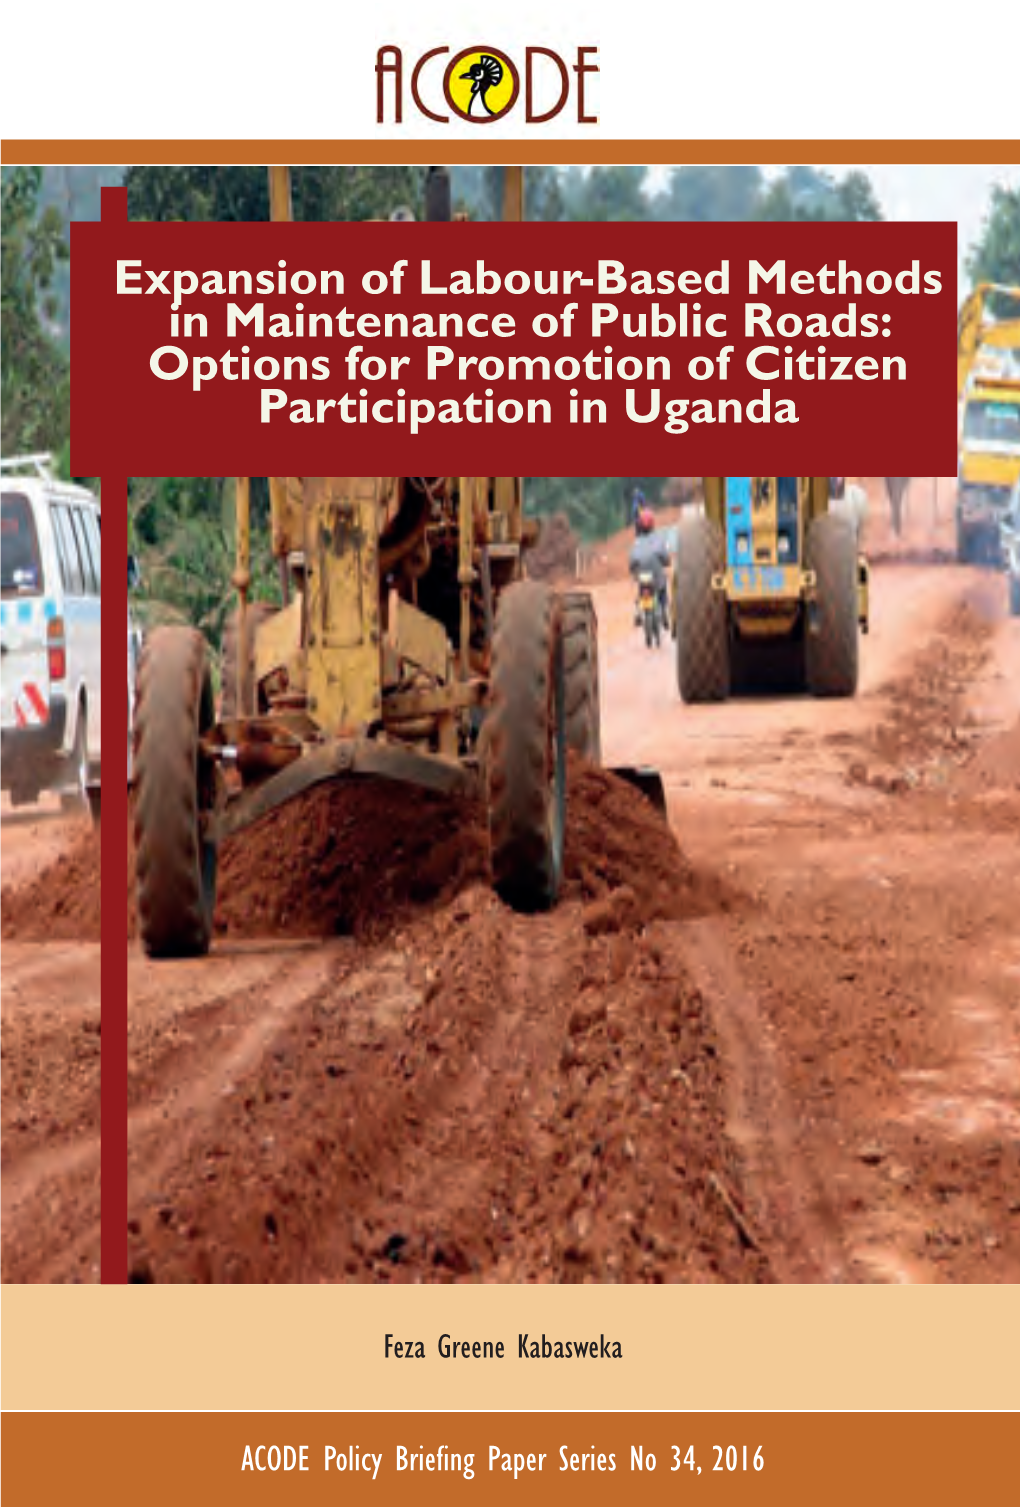 Expansion of Labour-Based Methods in Maintenance of Public Roads: Options for Promotion of Citizen Participation in Uganda